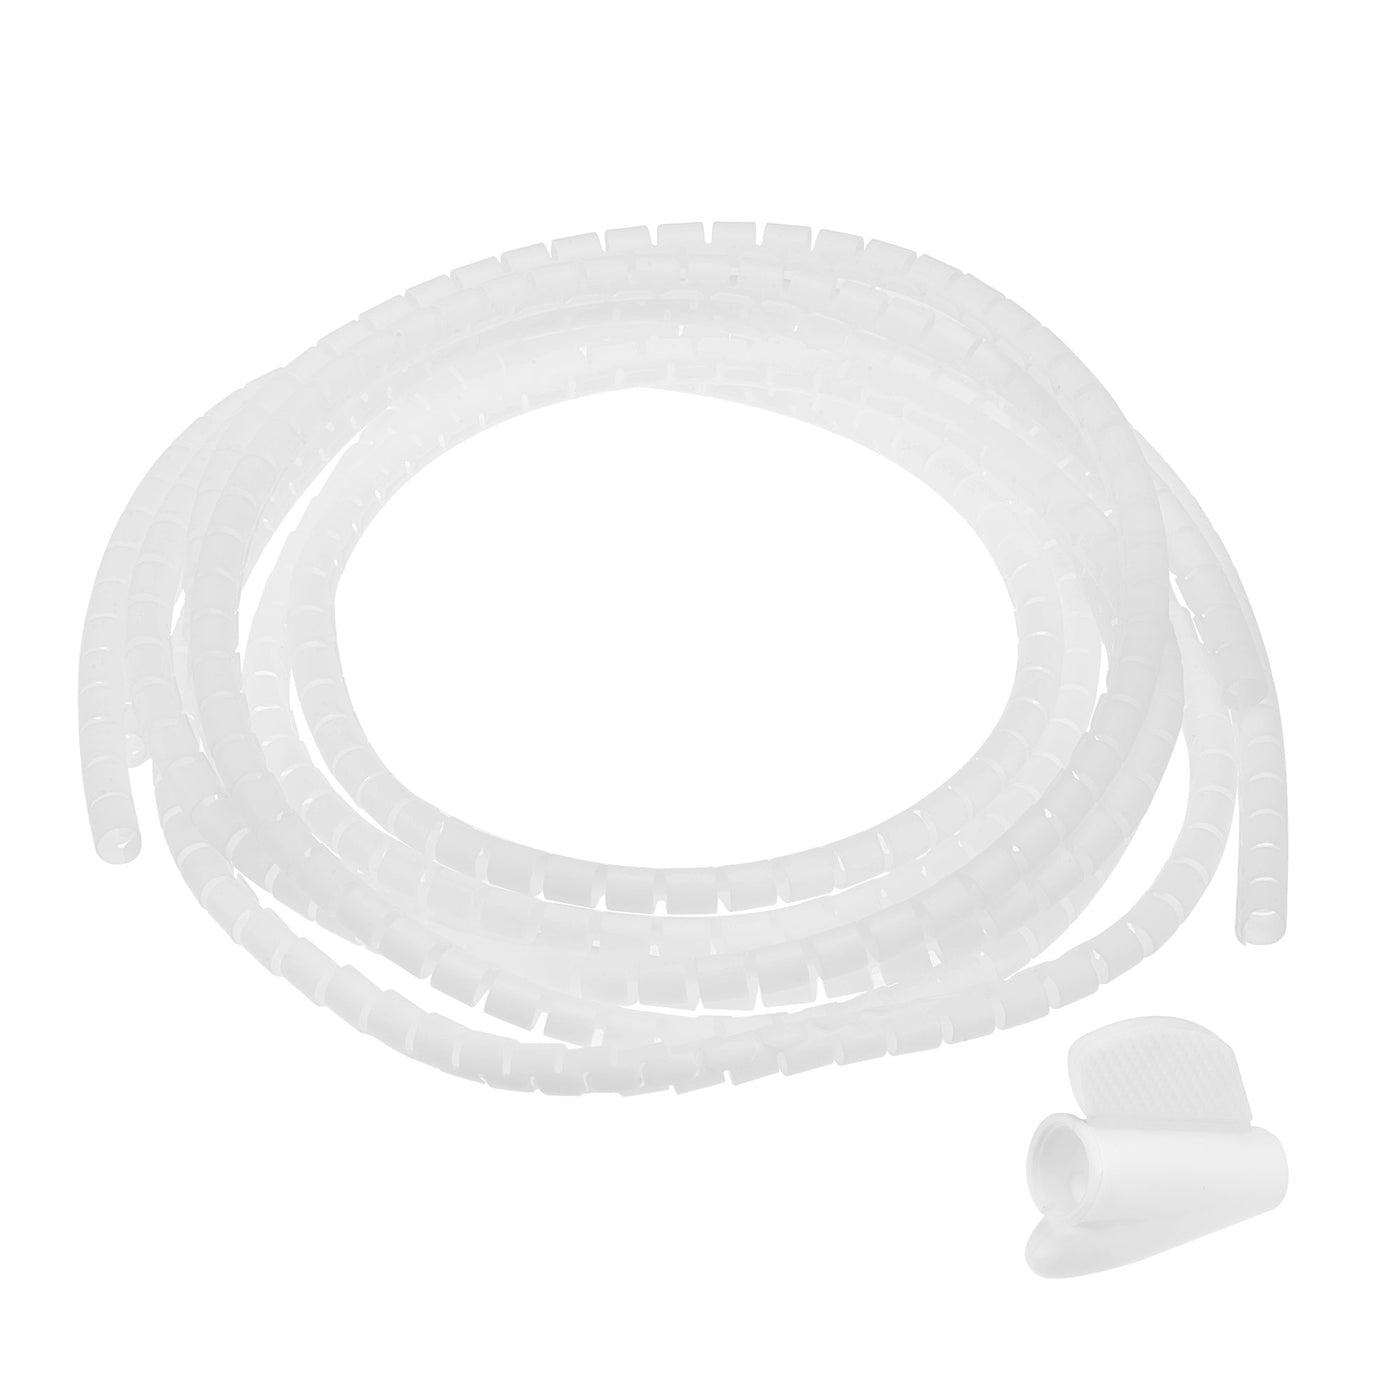 uxcell Uxcell 9mm Split Cable Wire Wrap for Cord Management White 2 Meters with Zipper 2 pcs